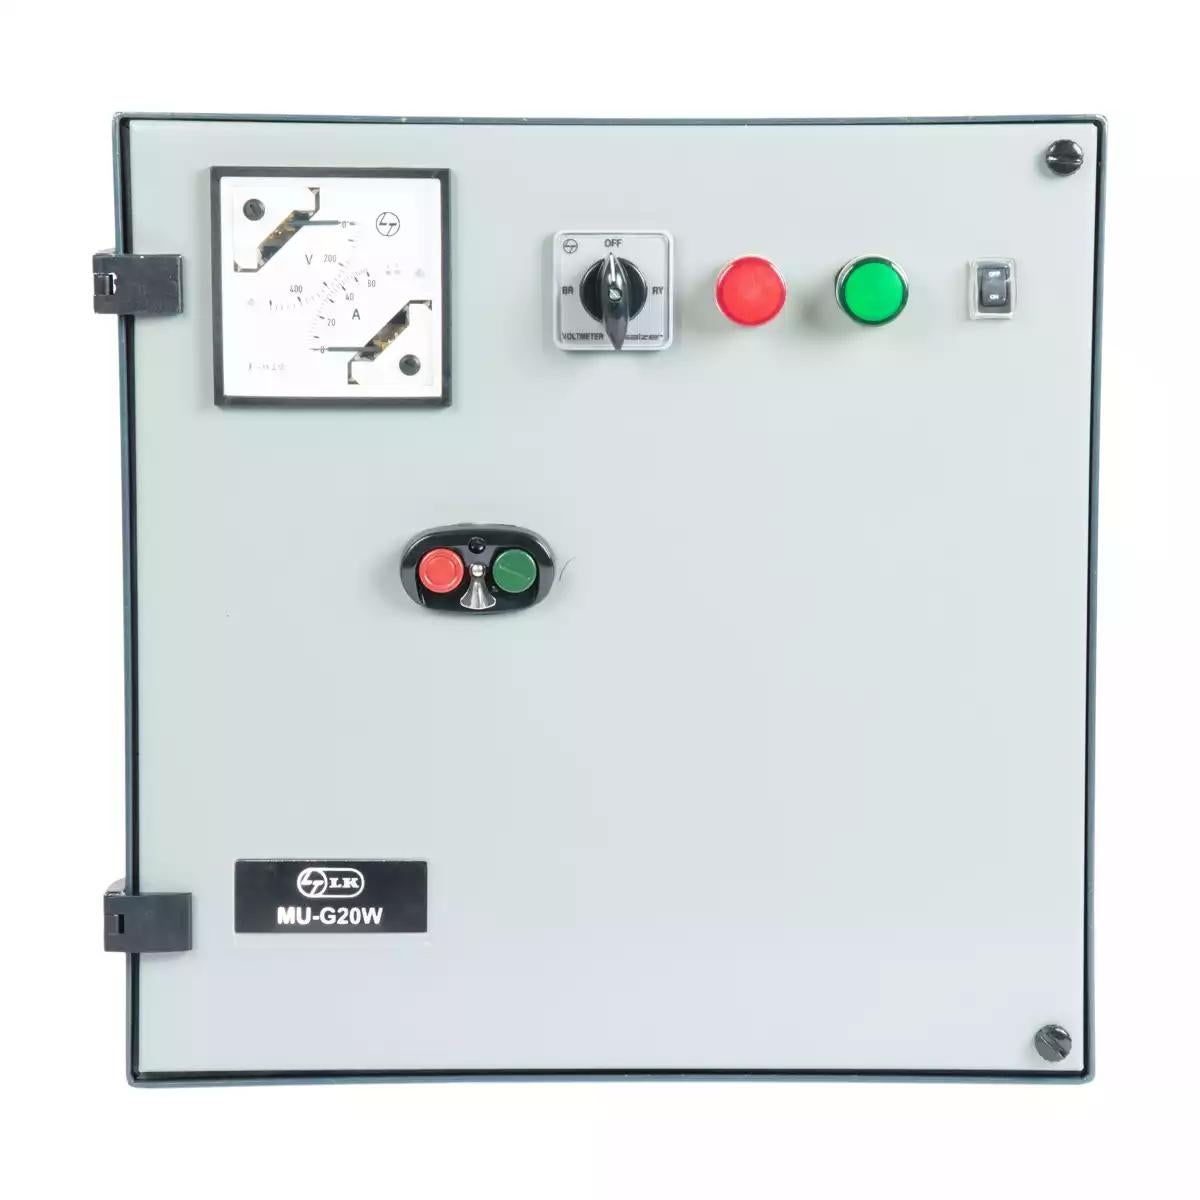 Three Phase Fully Automatic Star Delta Controller with WLC for Submersible Pump Application,MU-G20W,15 HP,FASD